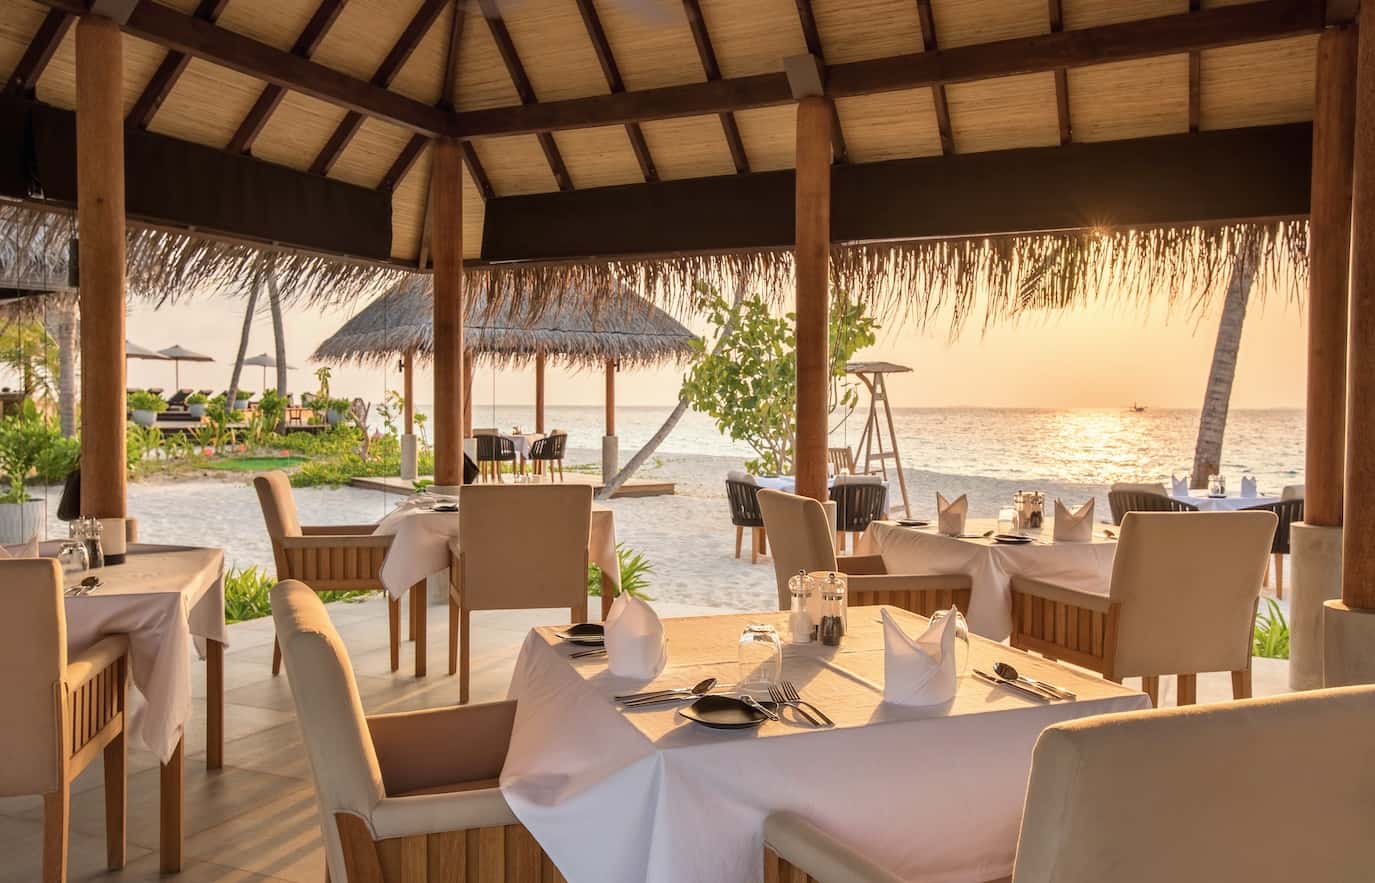 spectacular seafront dining in the Maldives